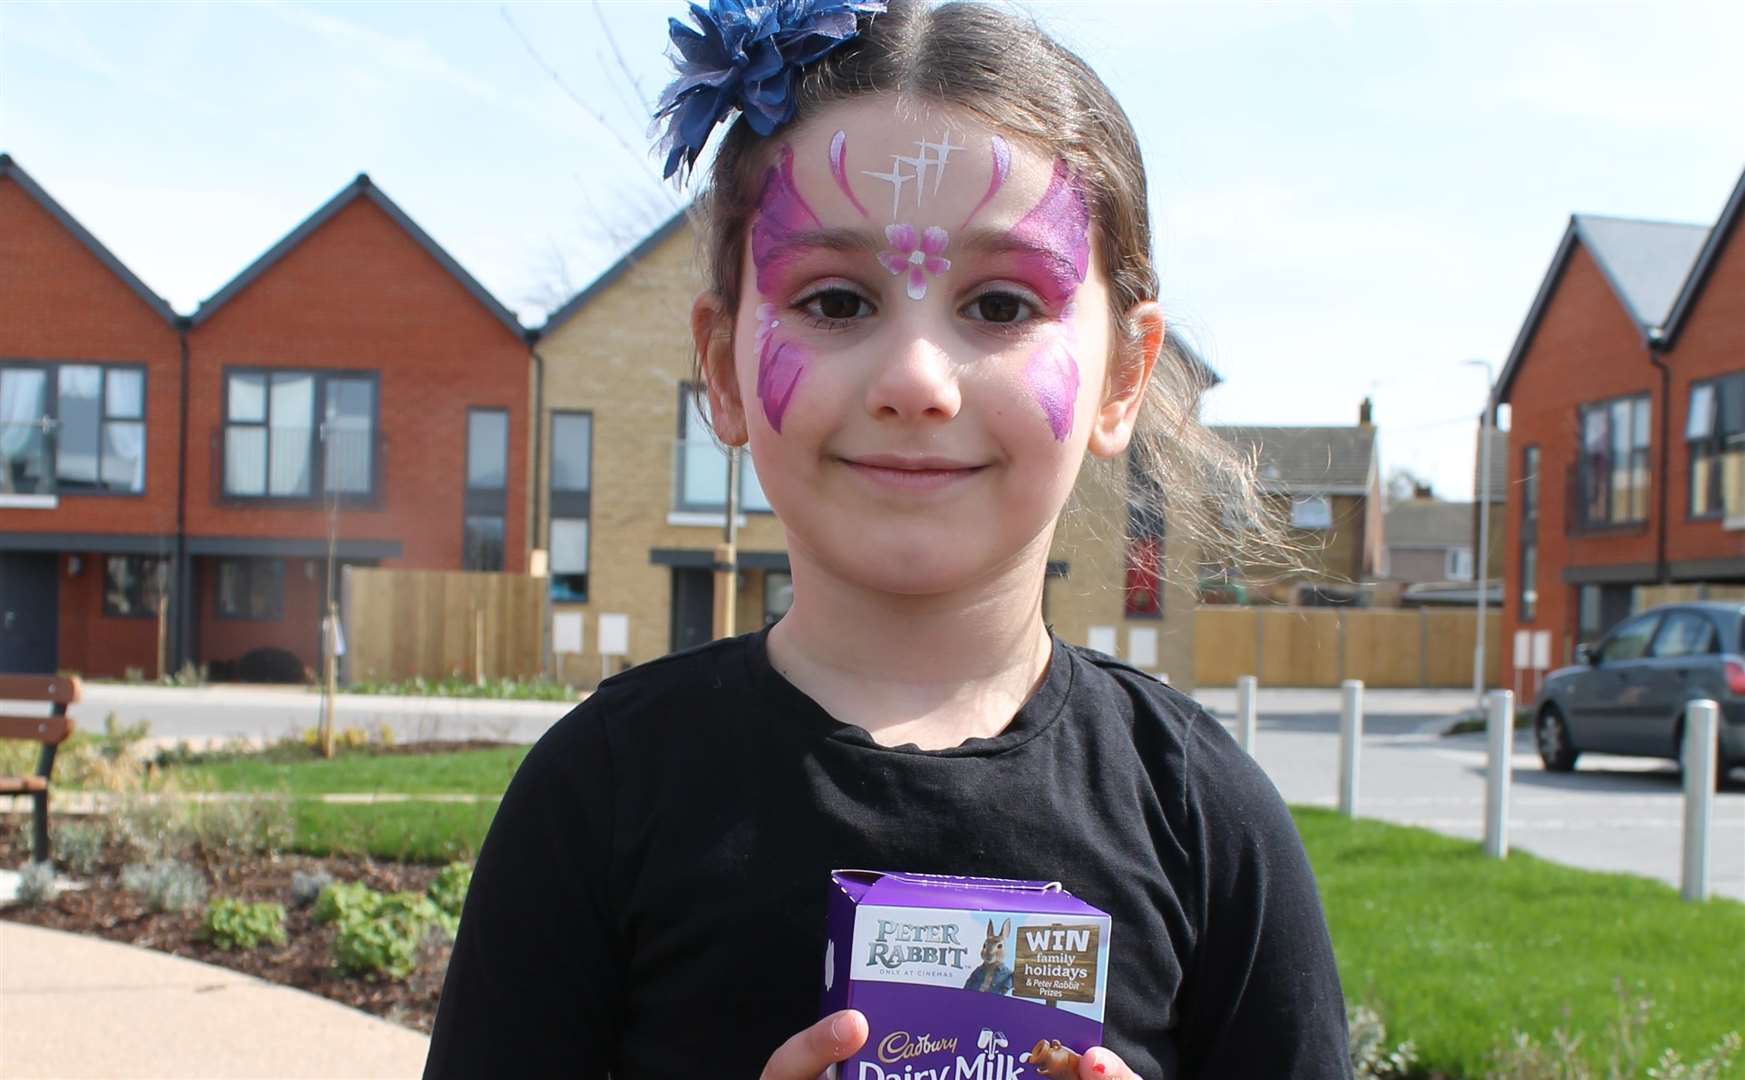 Optivo held an Easter Egg hunt to welcome new families